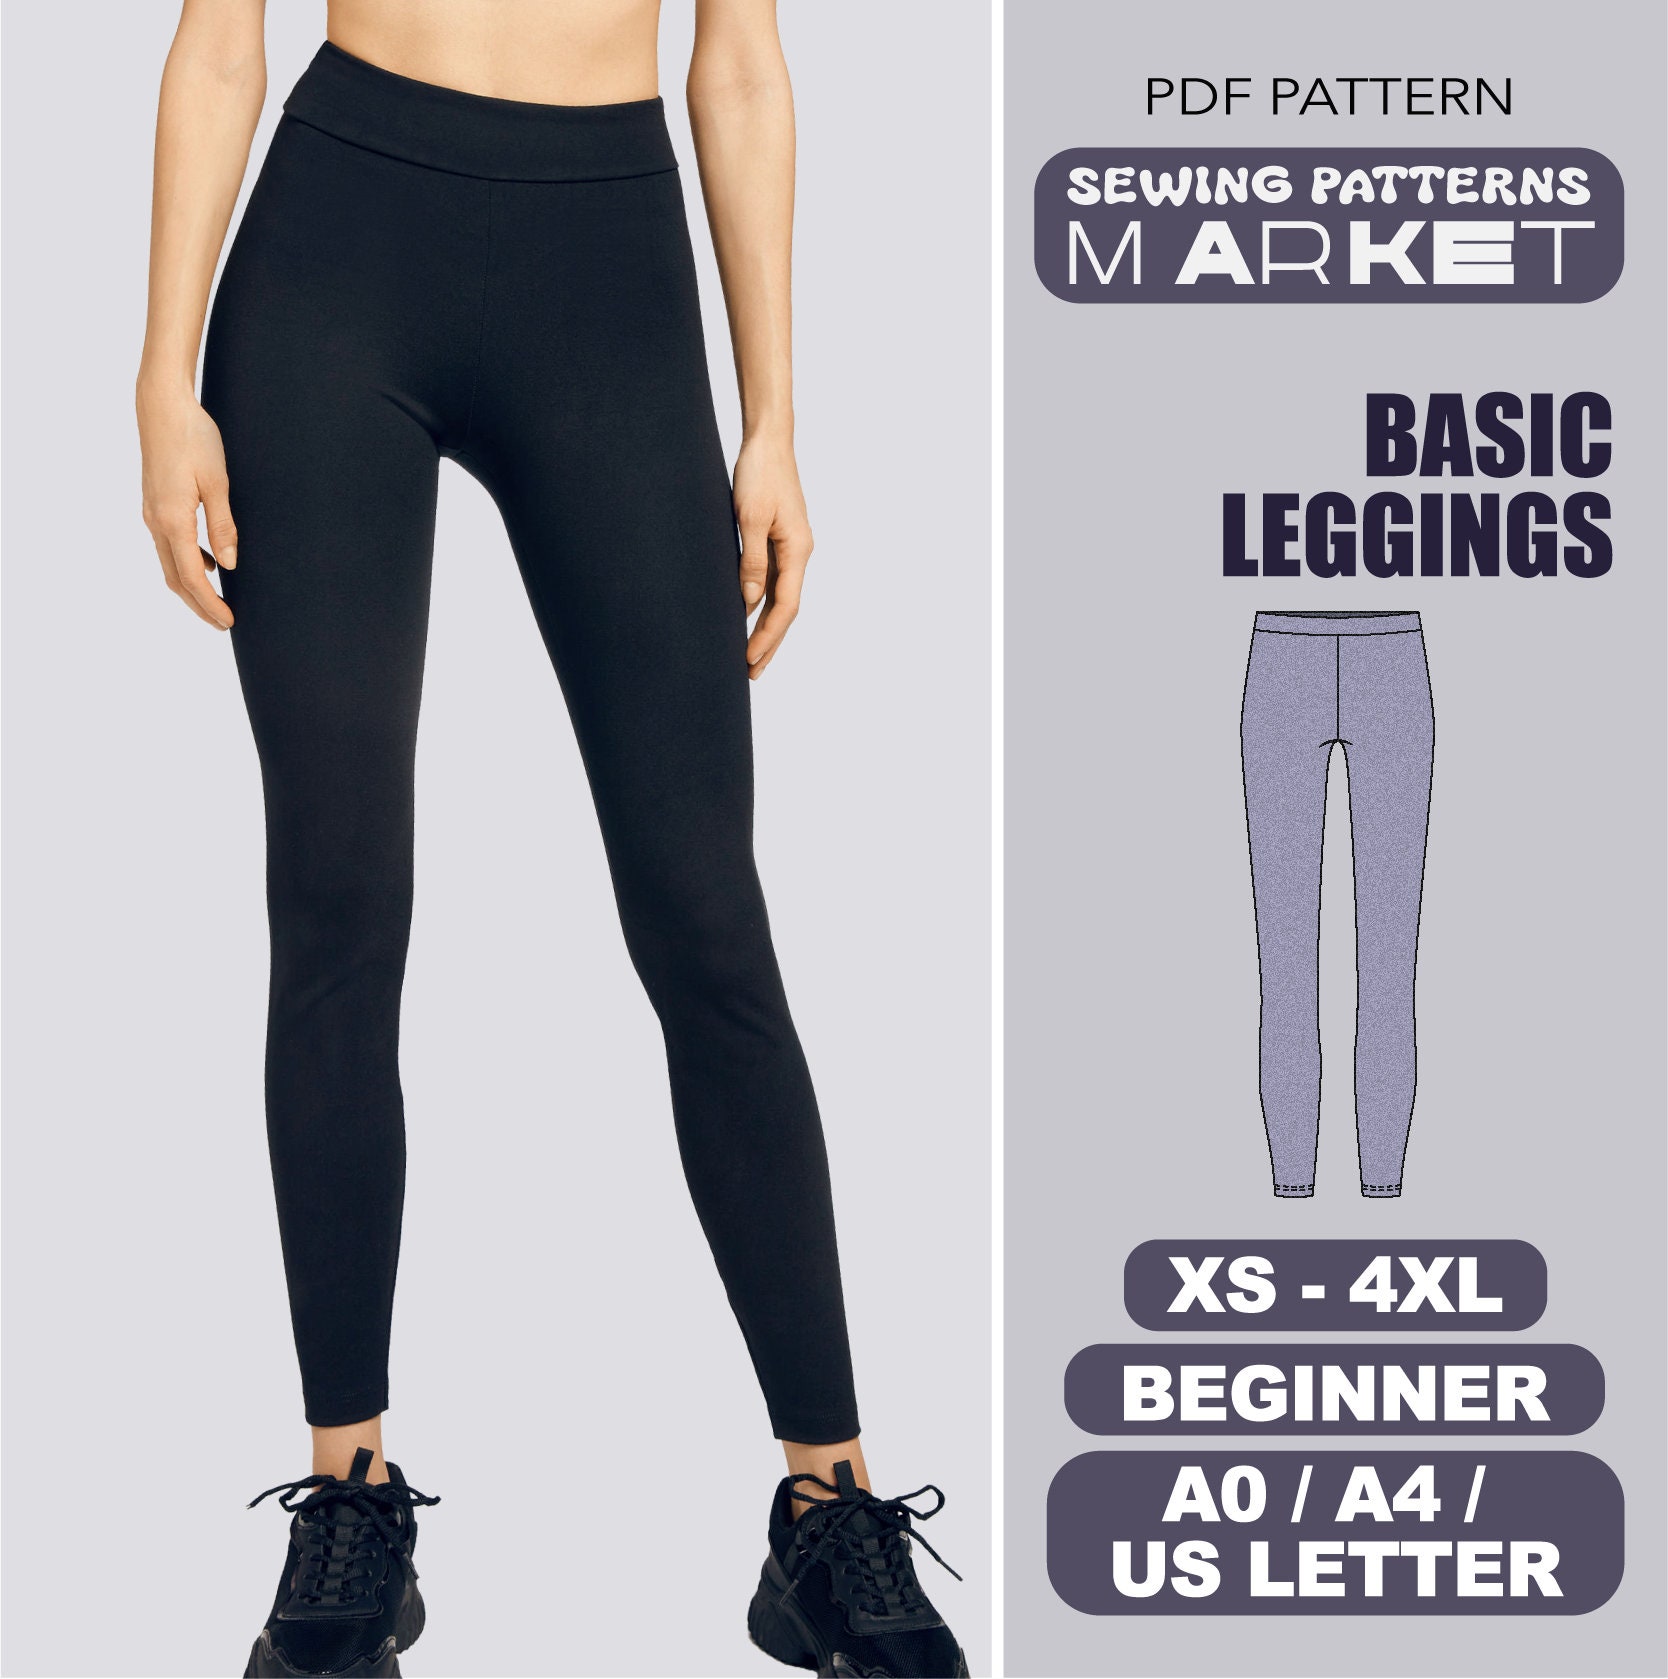 Capri Leggings in Bamboo/cotton/spandex Jersey With 4 Way Stretch. 